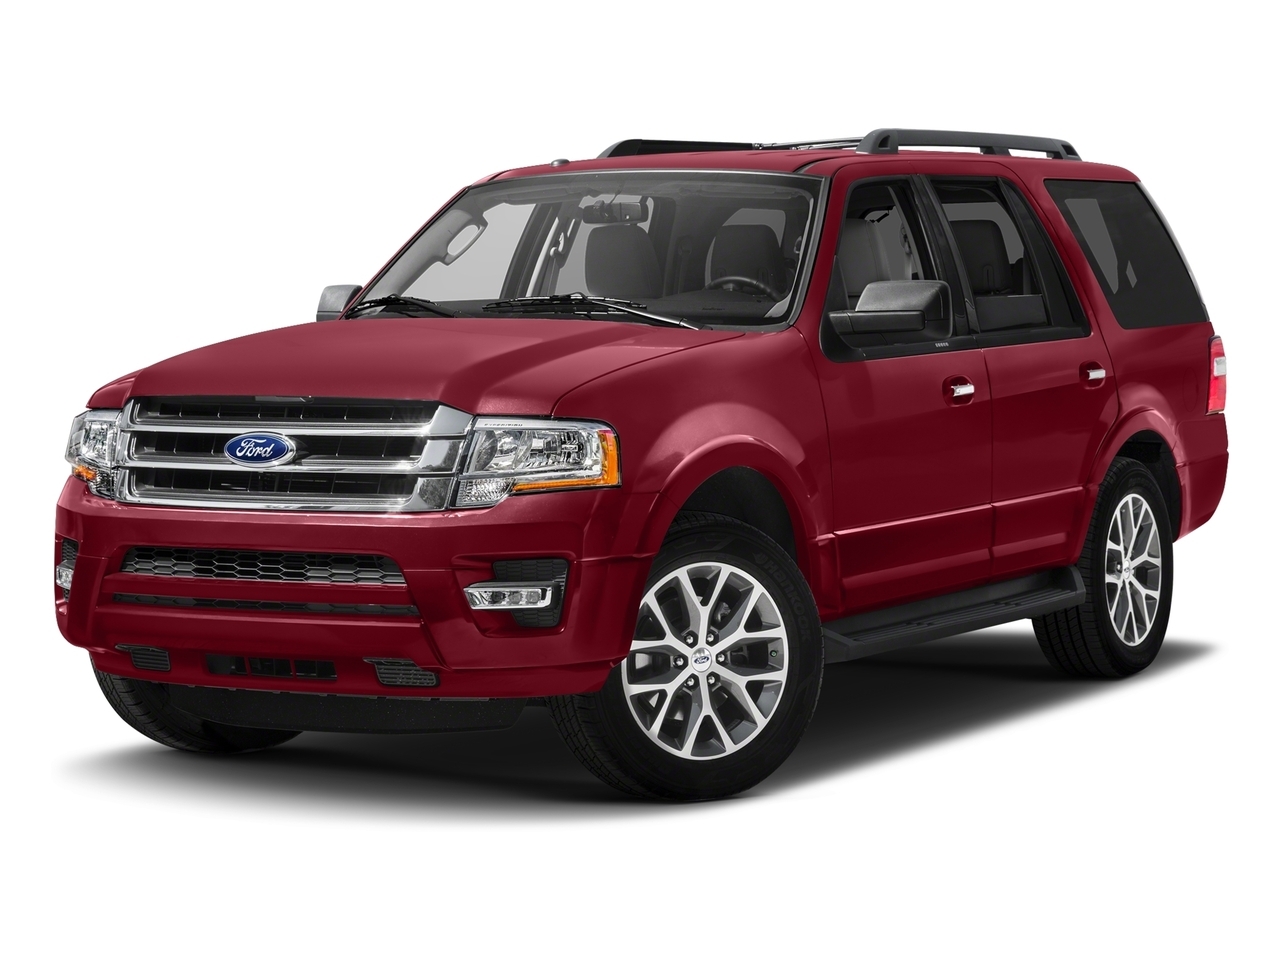 2017 Ford Expedition XLT - 4WD | POWER SEATS | ROOF RACK | TOW HOOK 